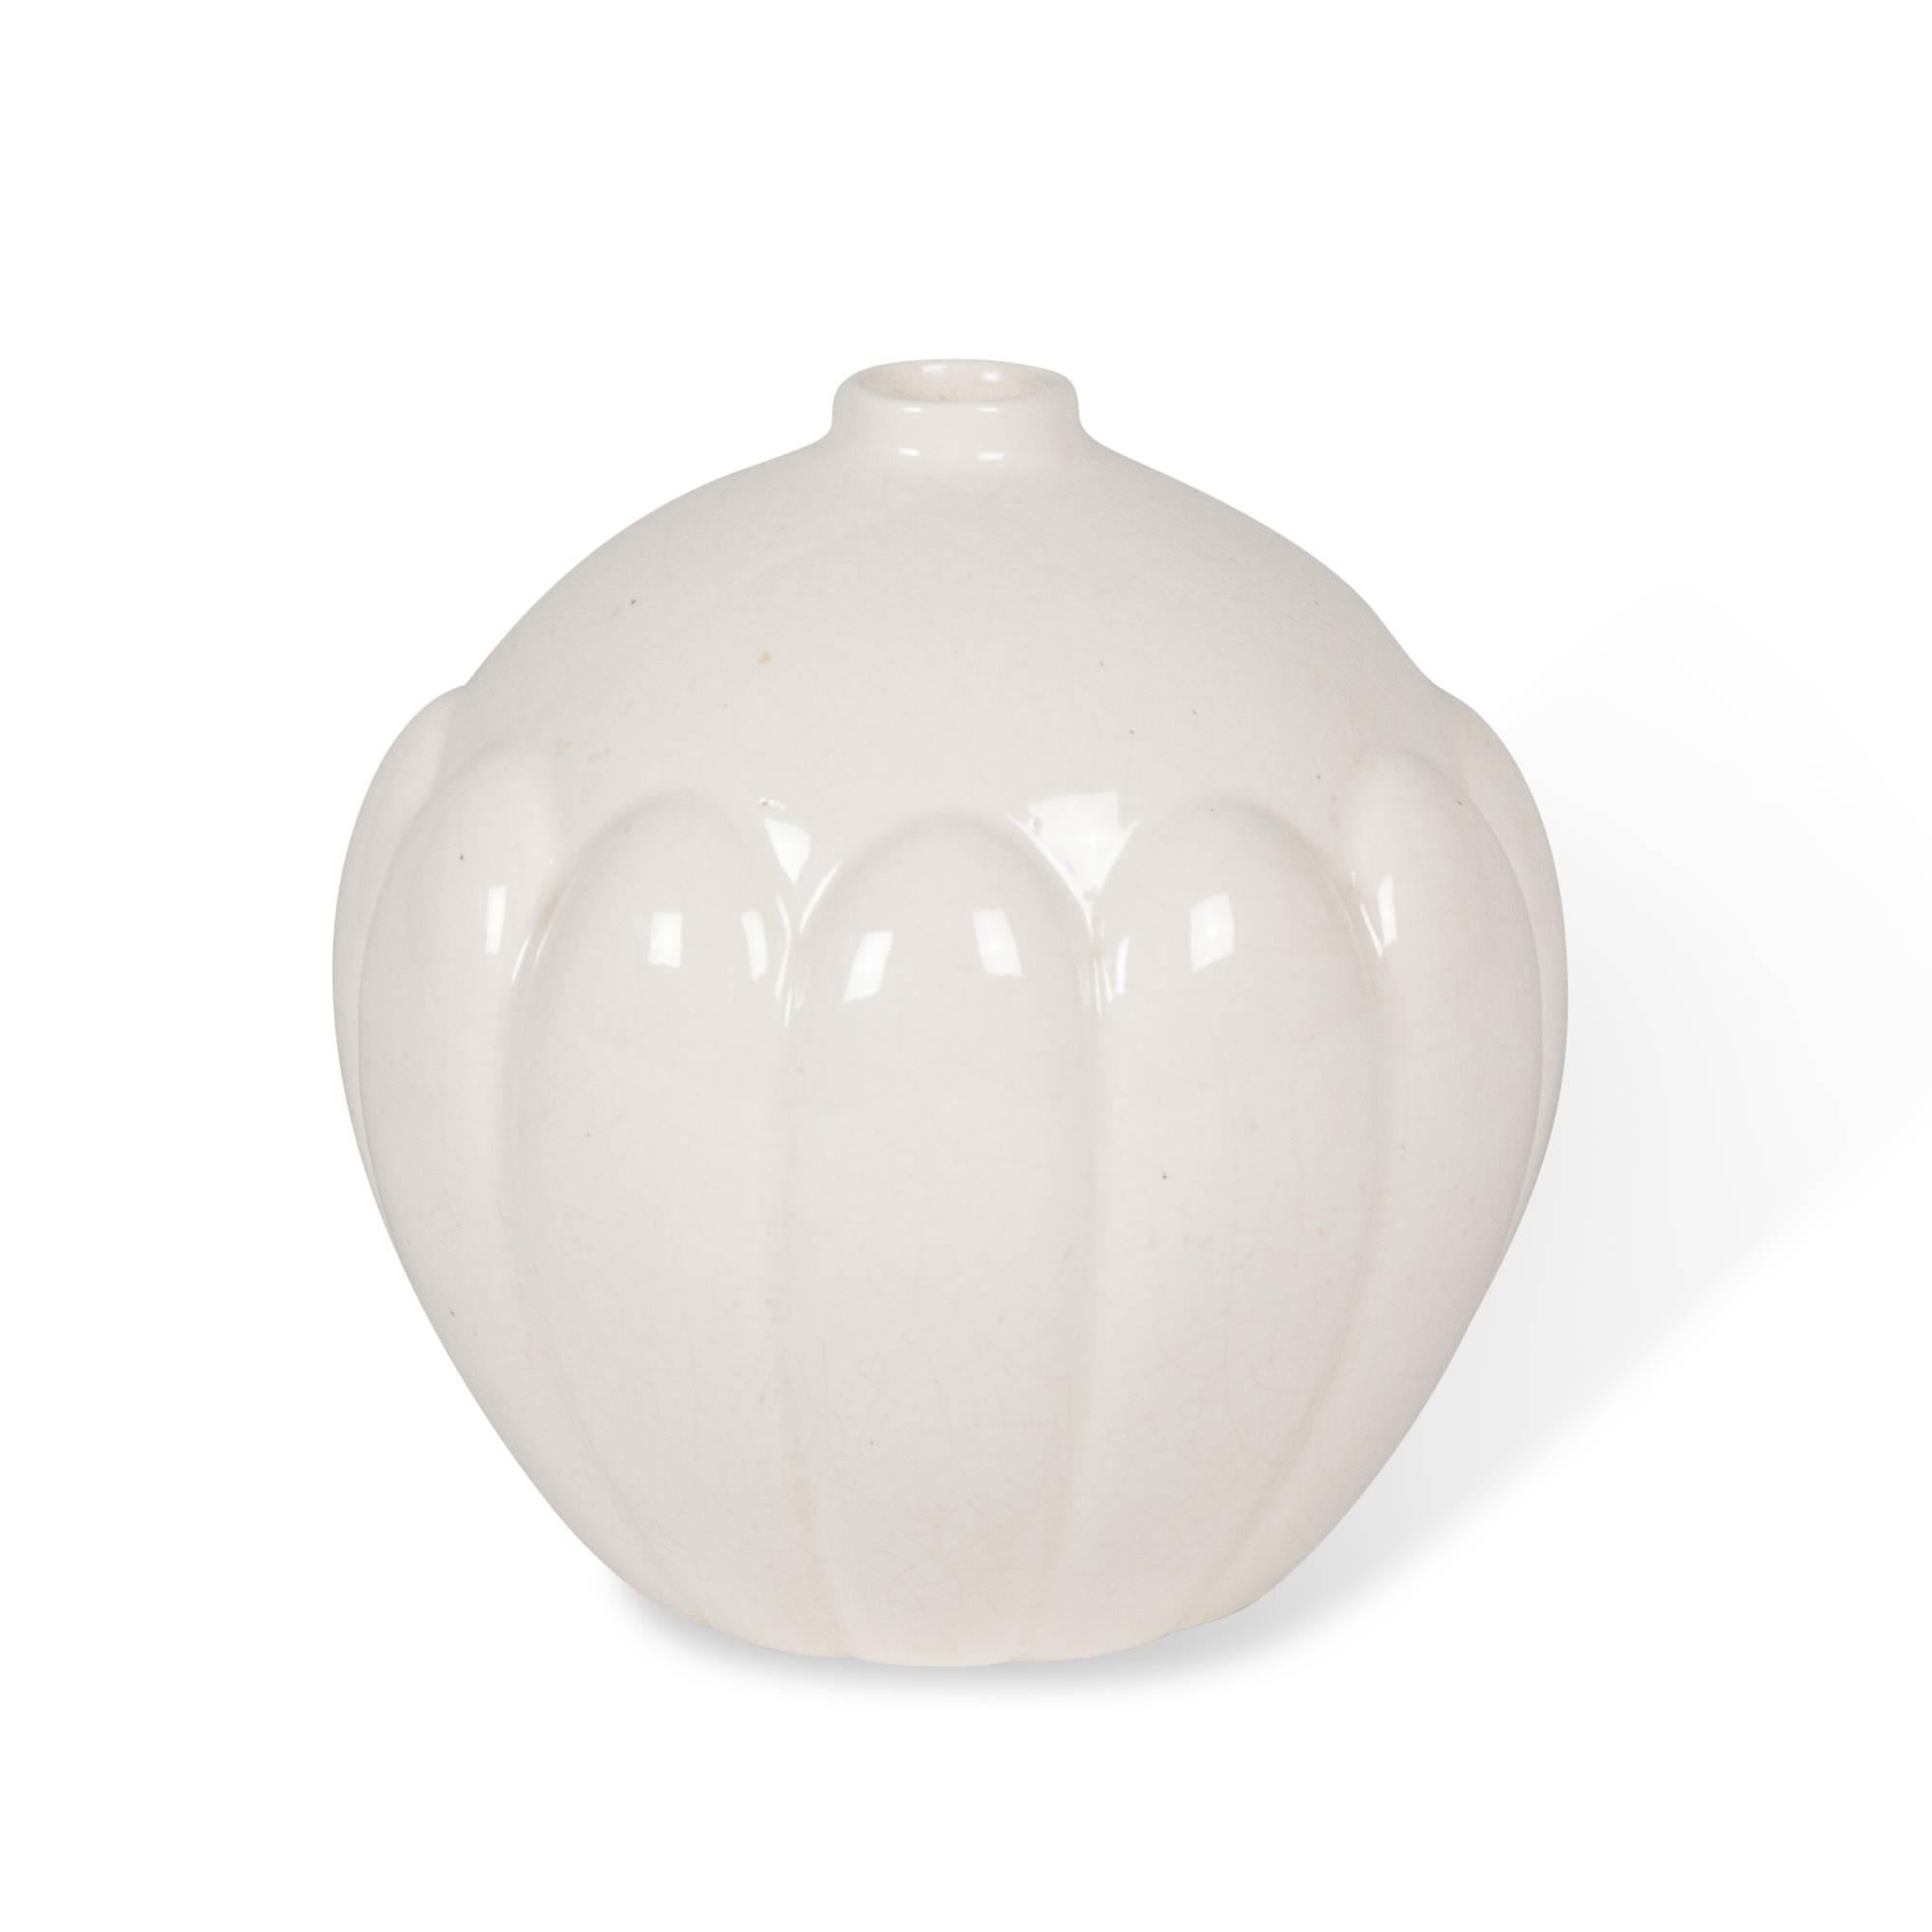 Mid-20th Century Two White Ceramic Vases, French, 1930s For Sale